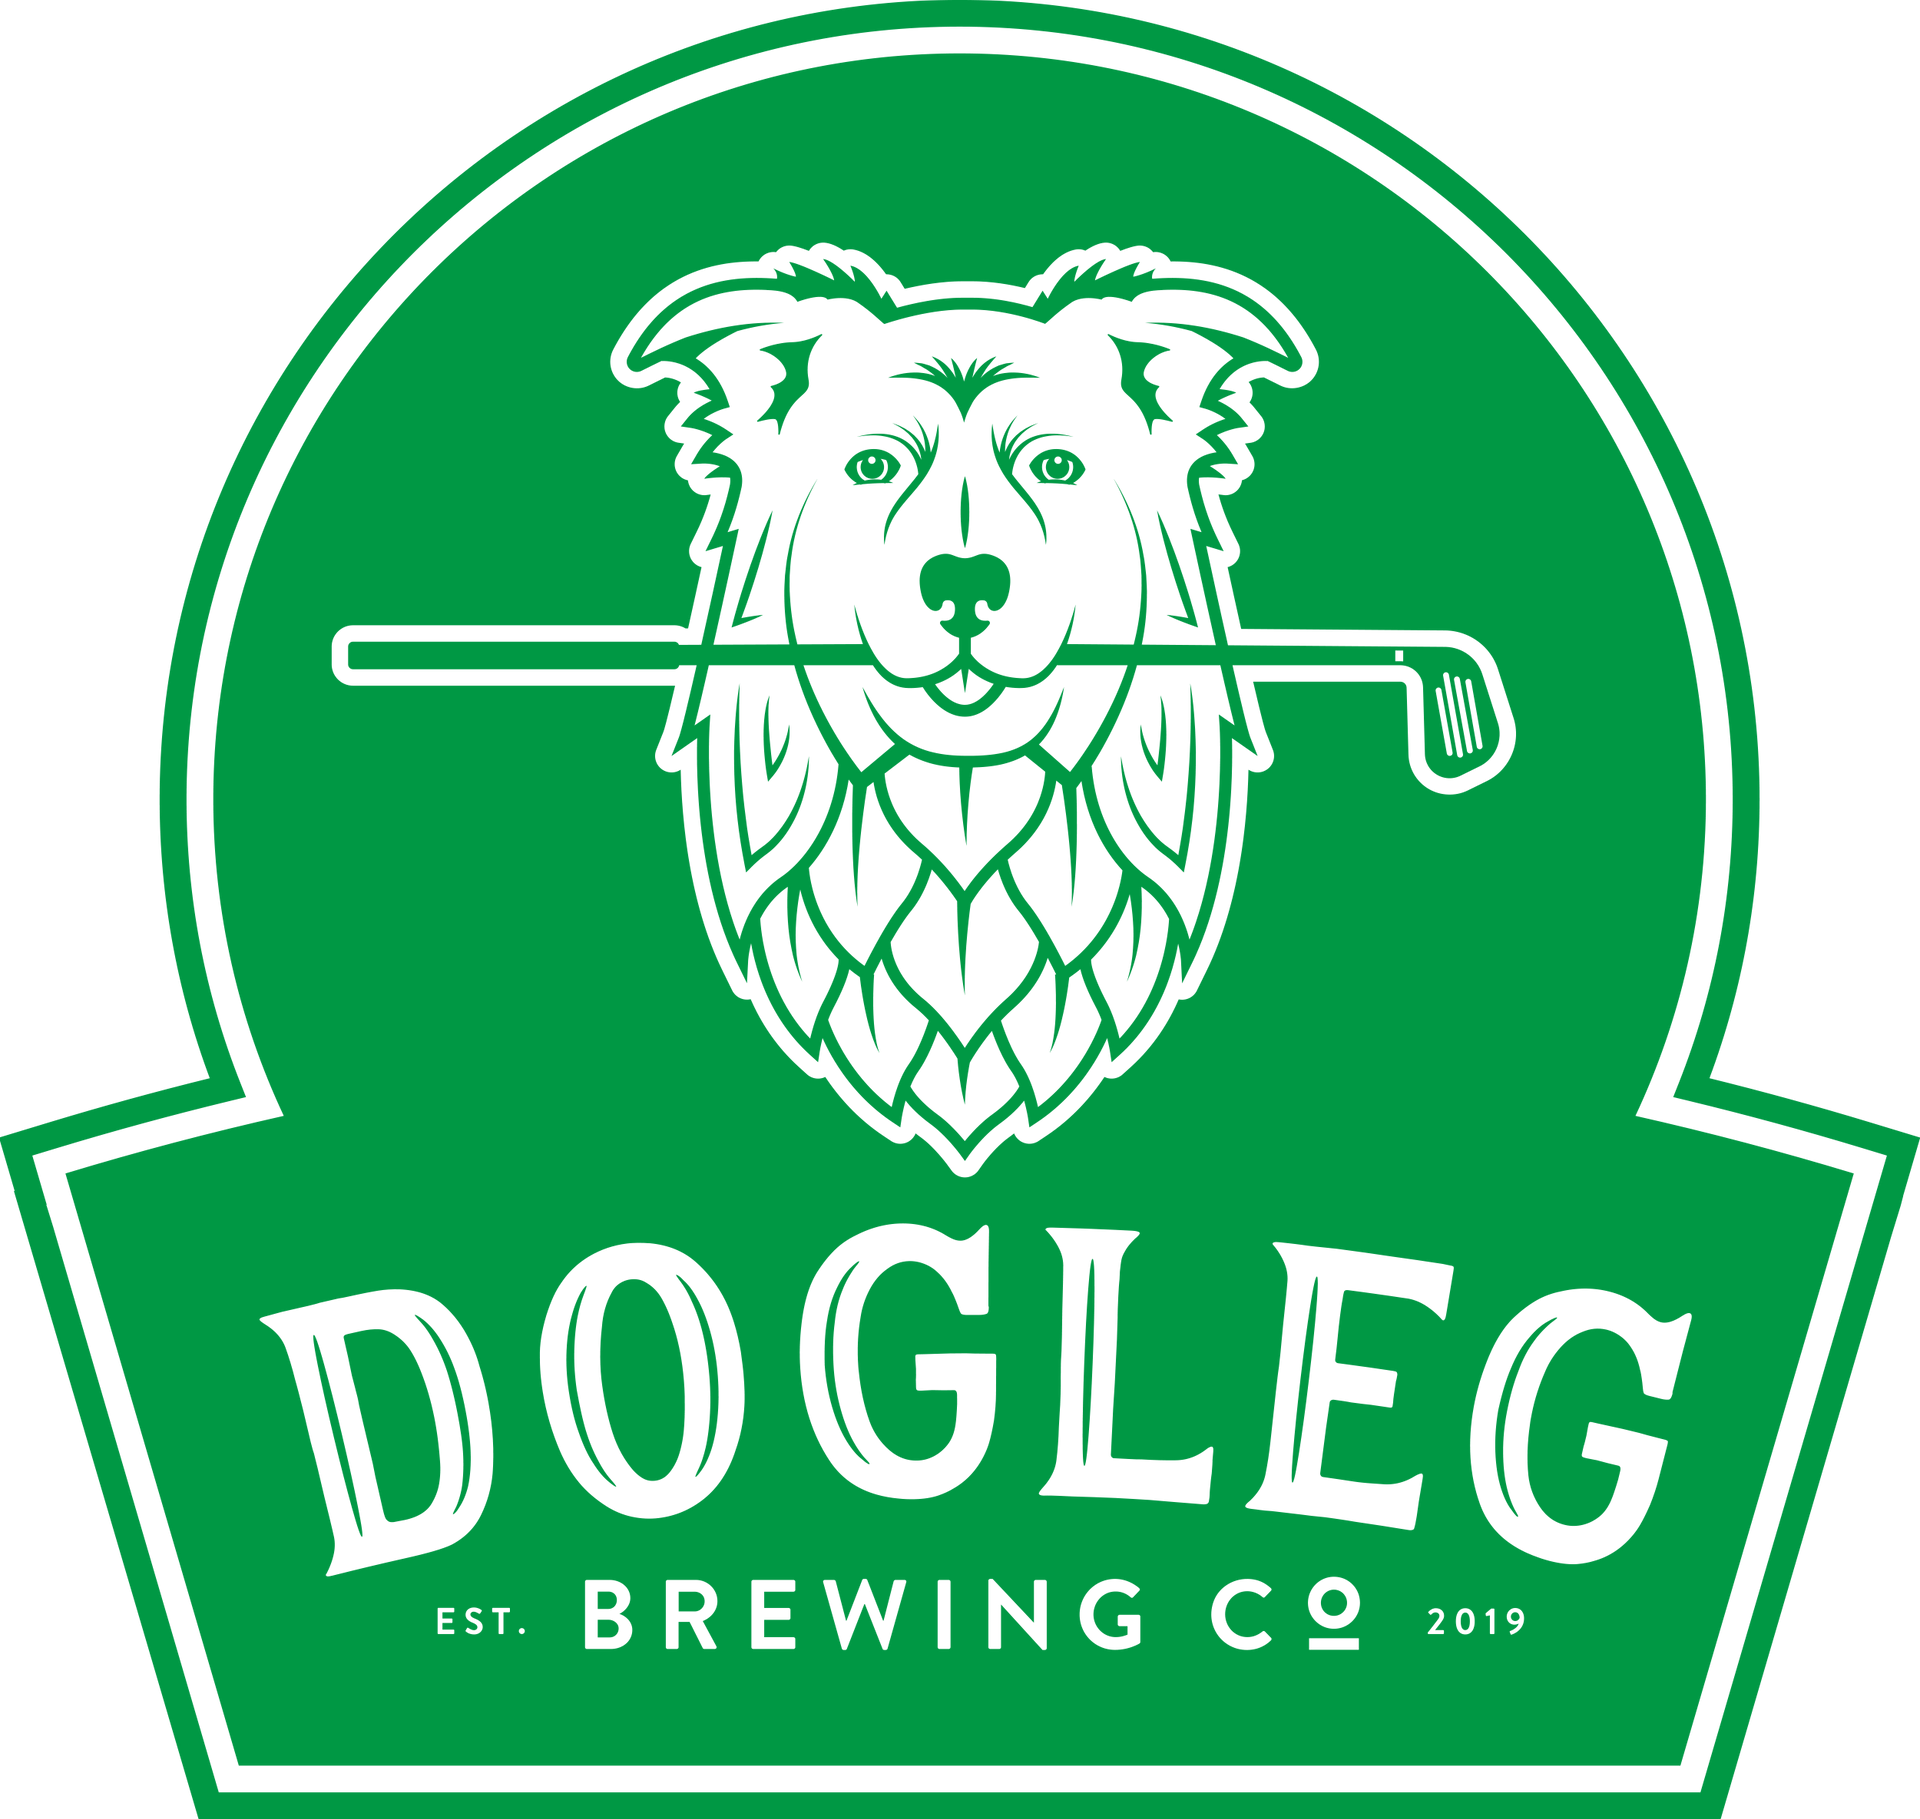 a logo for dogleg brewing company with a dog holding a golf club